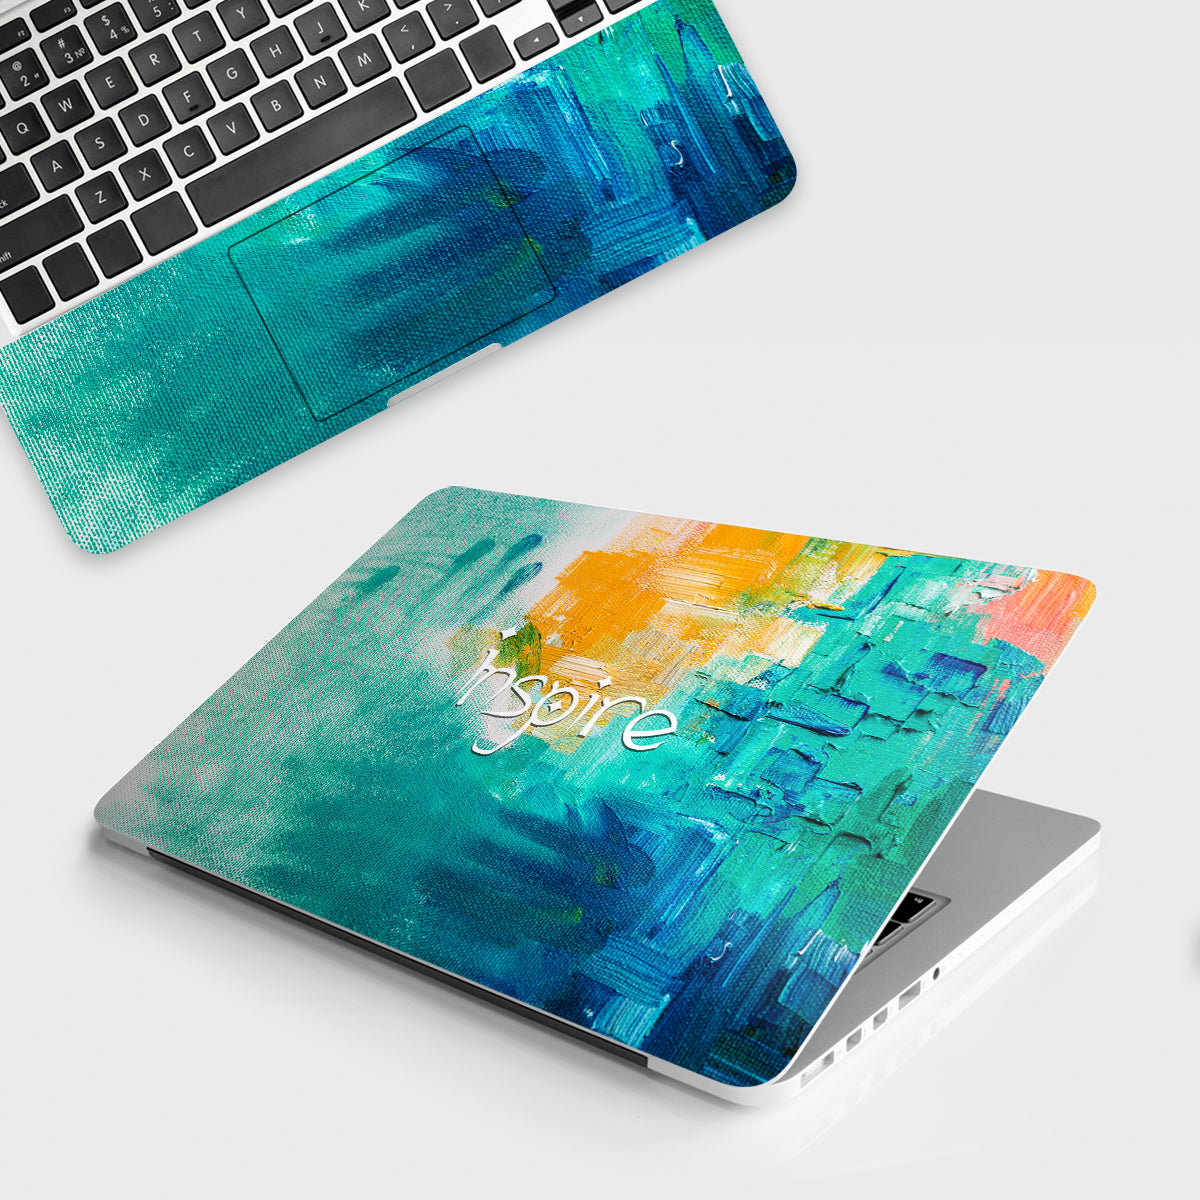 Fomo Store Laptop Skins Abstract Inspire Image 